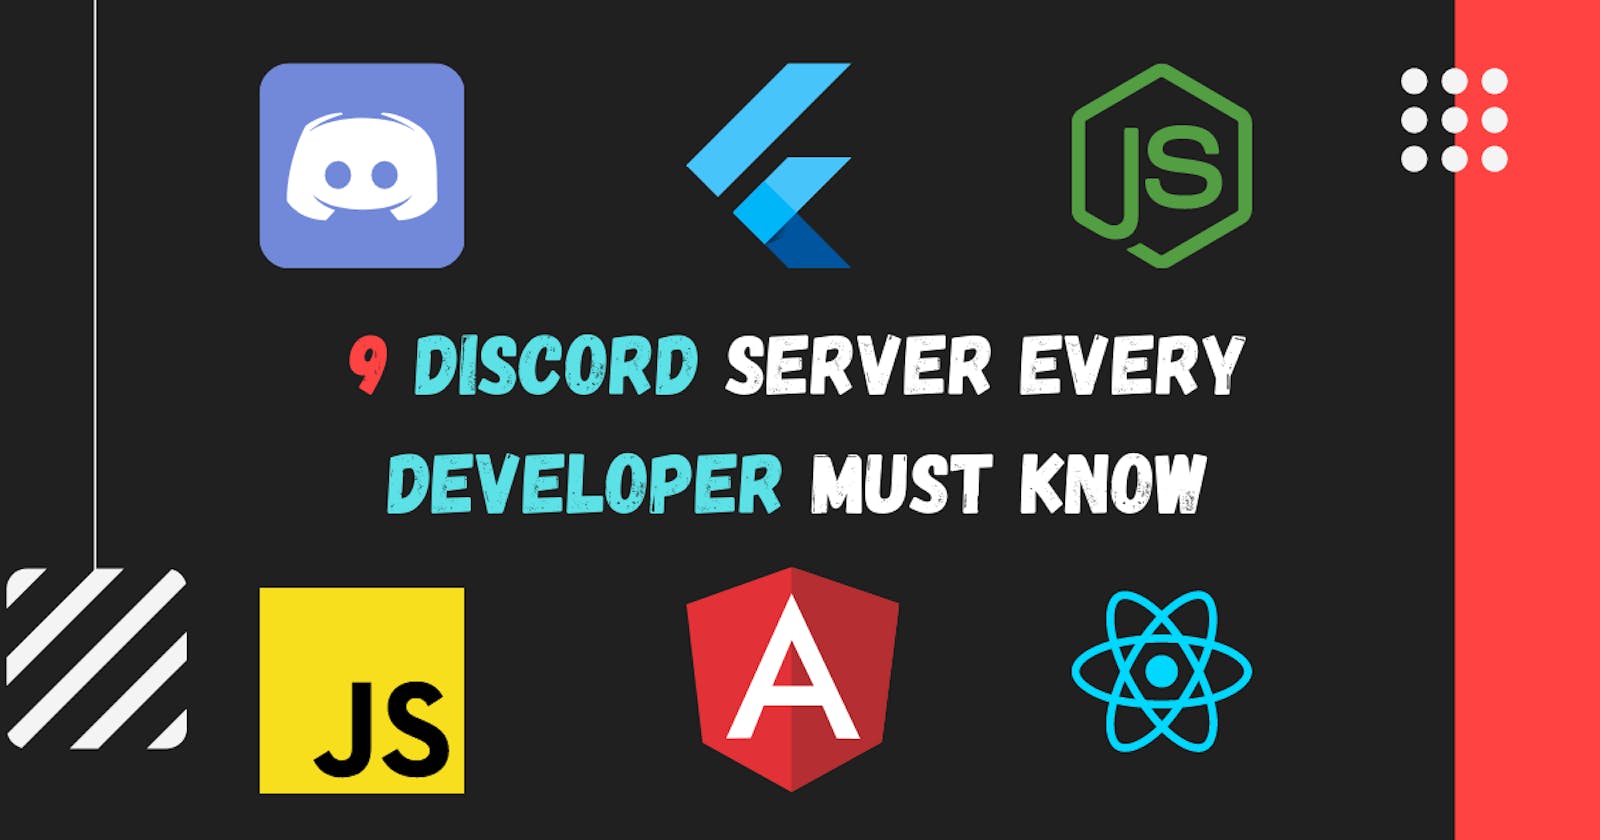 9 Discord server every developer must know💯